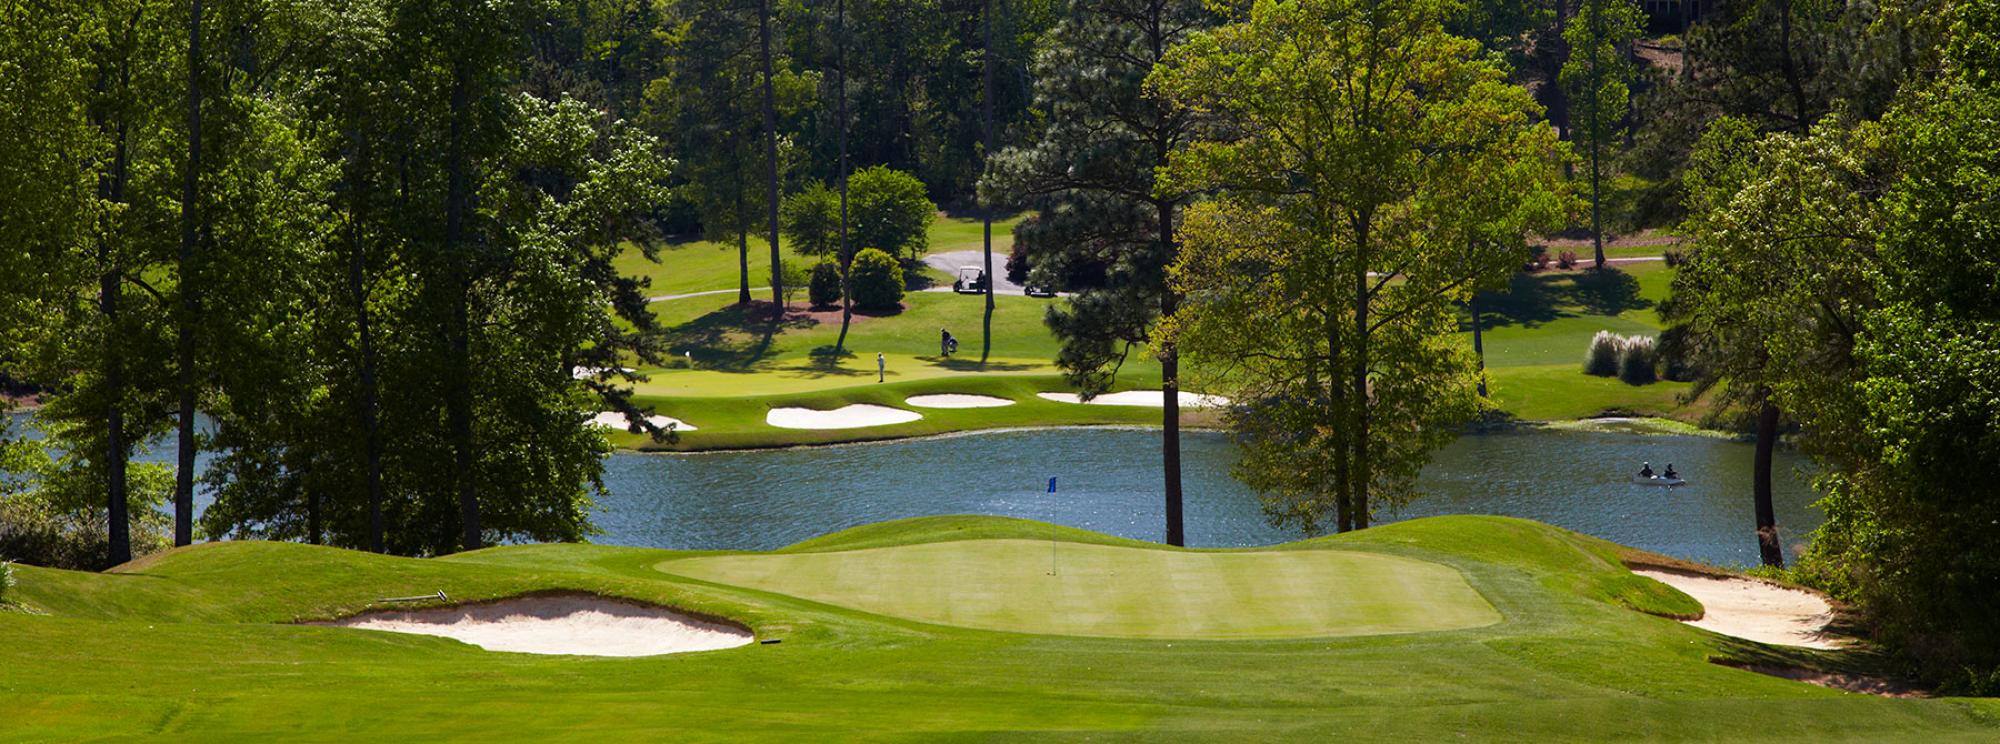 The Woodside Plantation Country Club's impressive golf course within brilliant South Carolina.